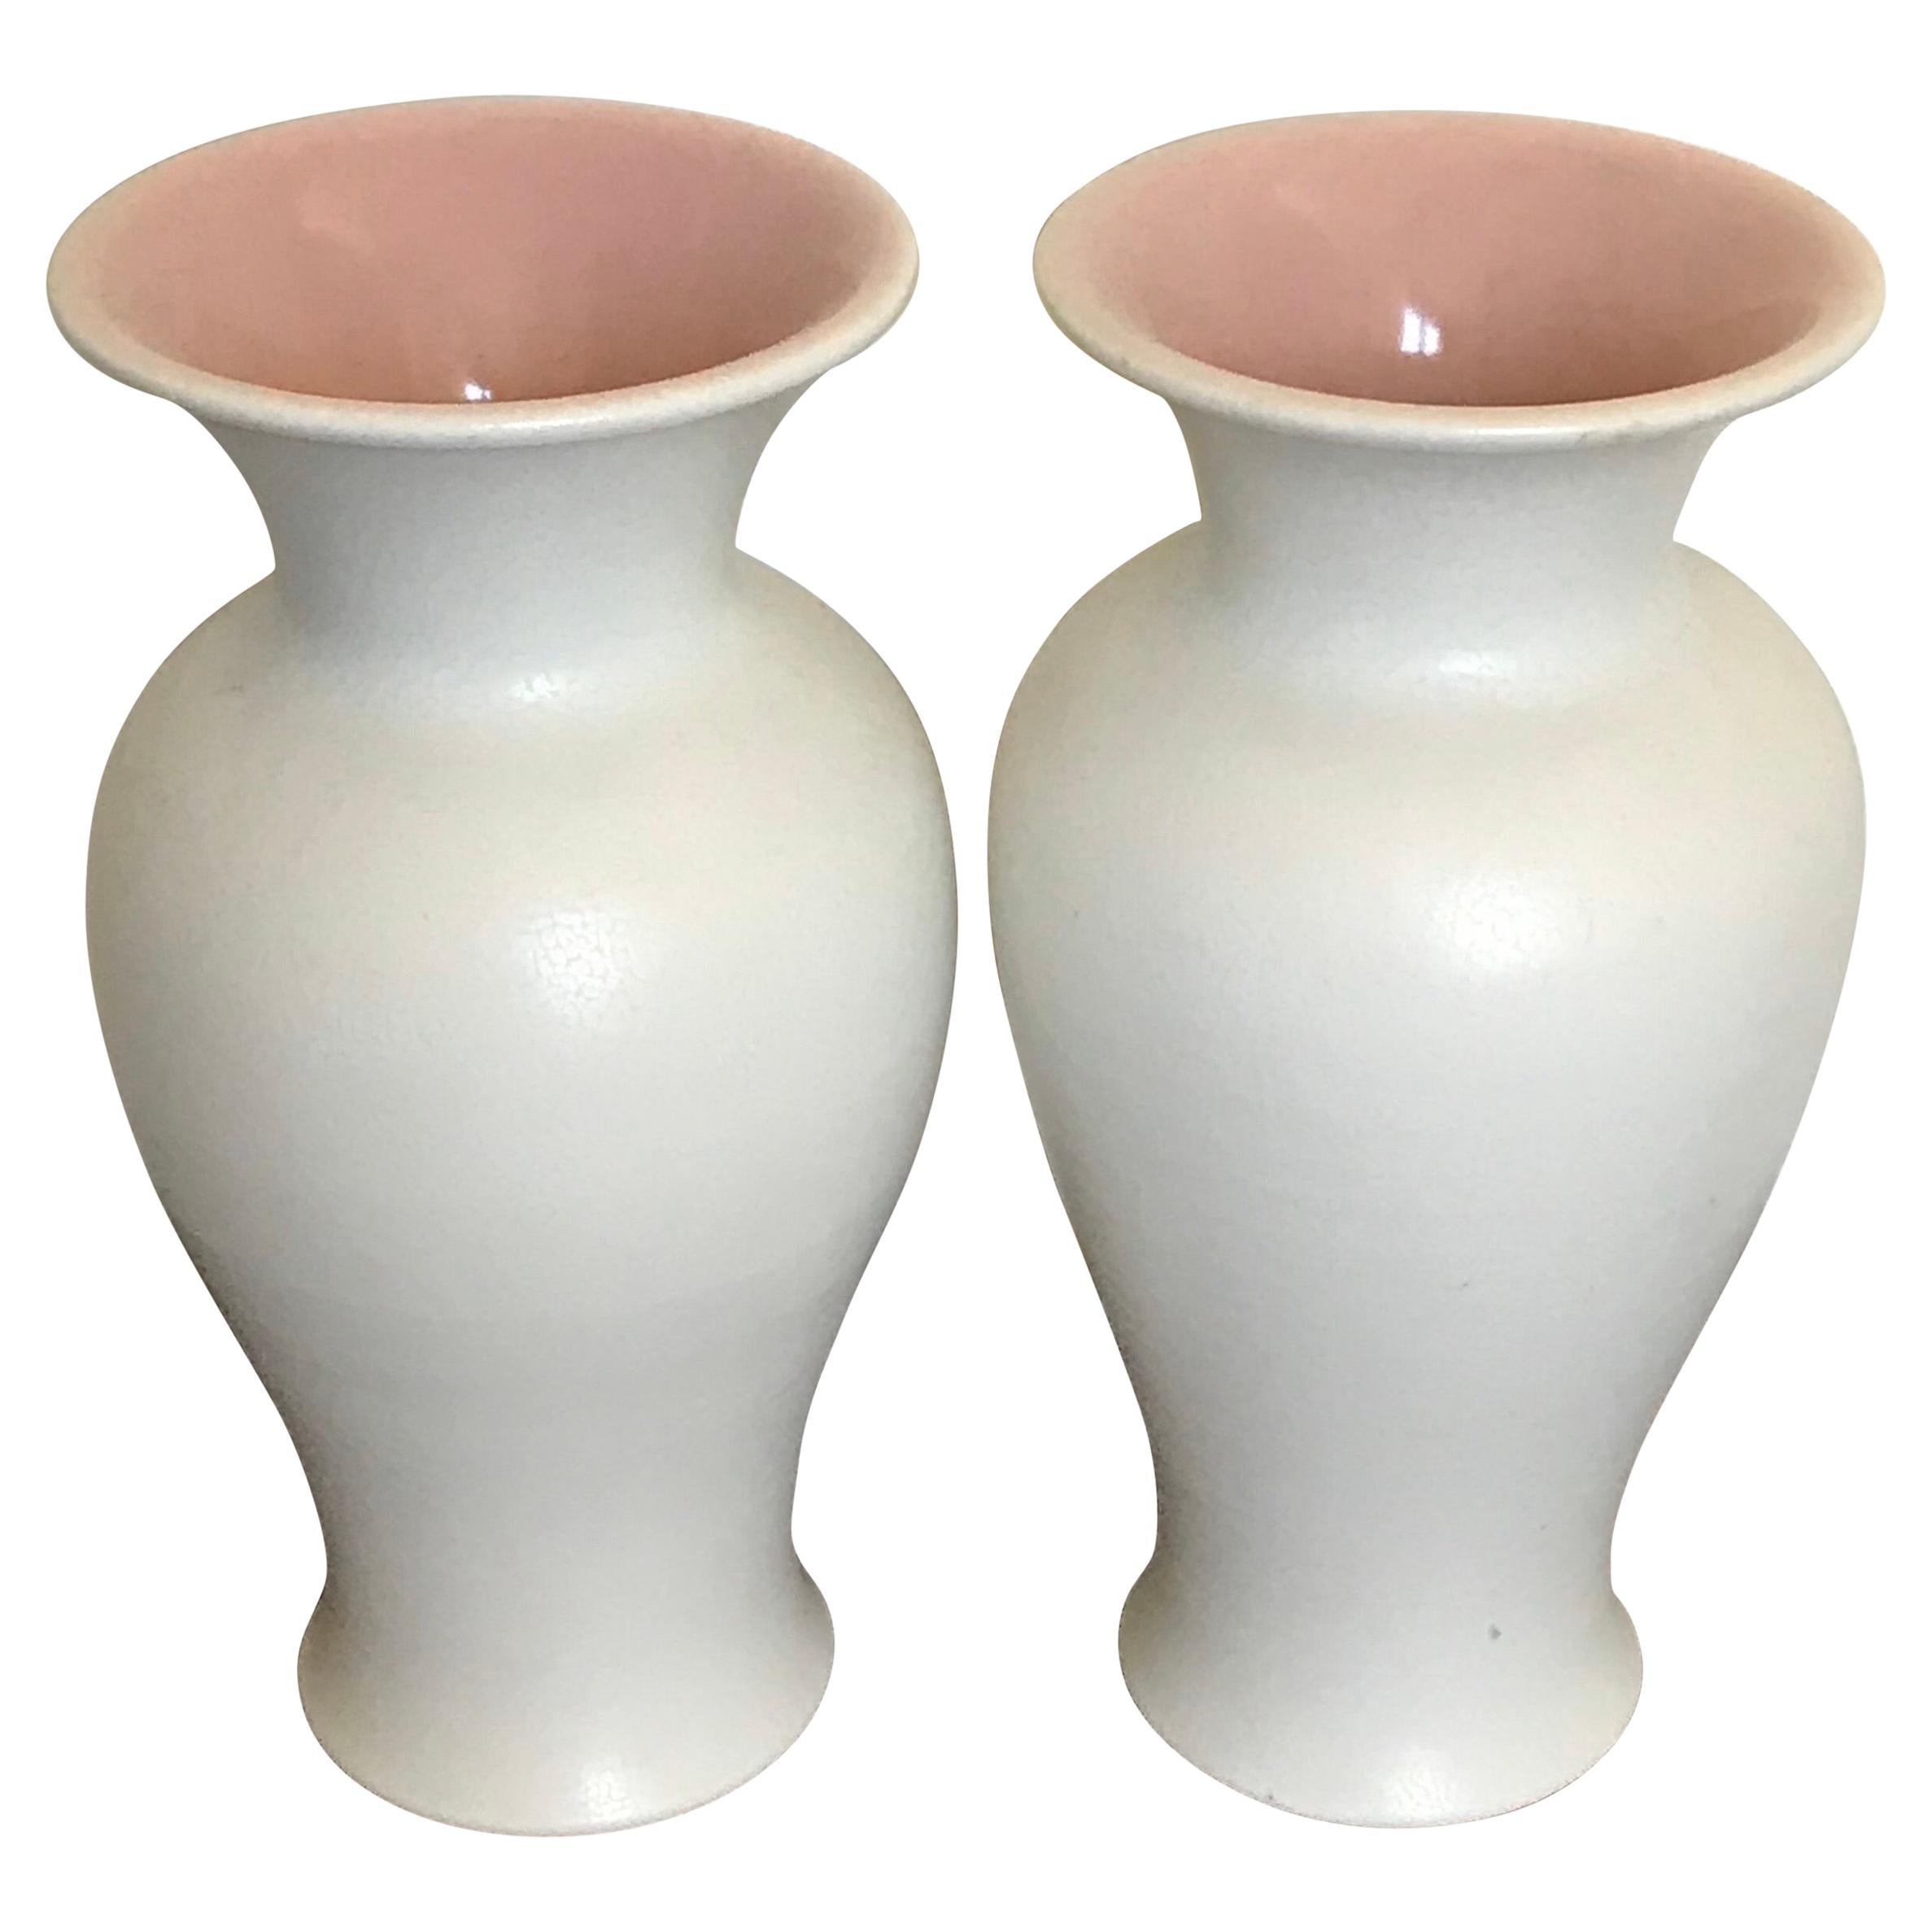 Pair of Mid-Century Modern Rookwood Vases, Pearl White Glaze, 1927 For Sale